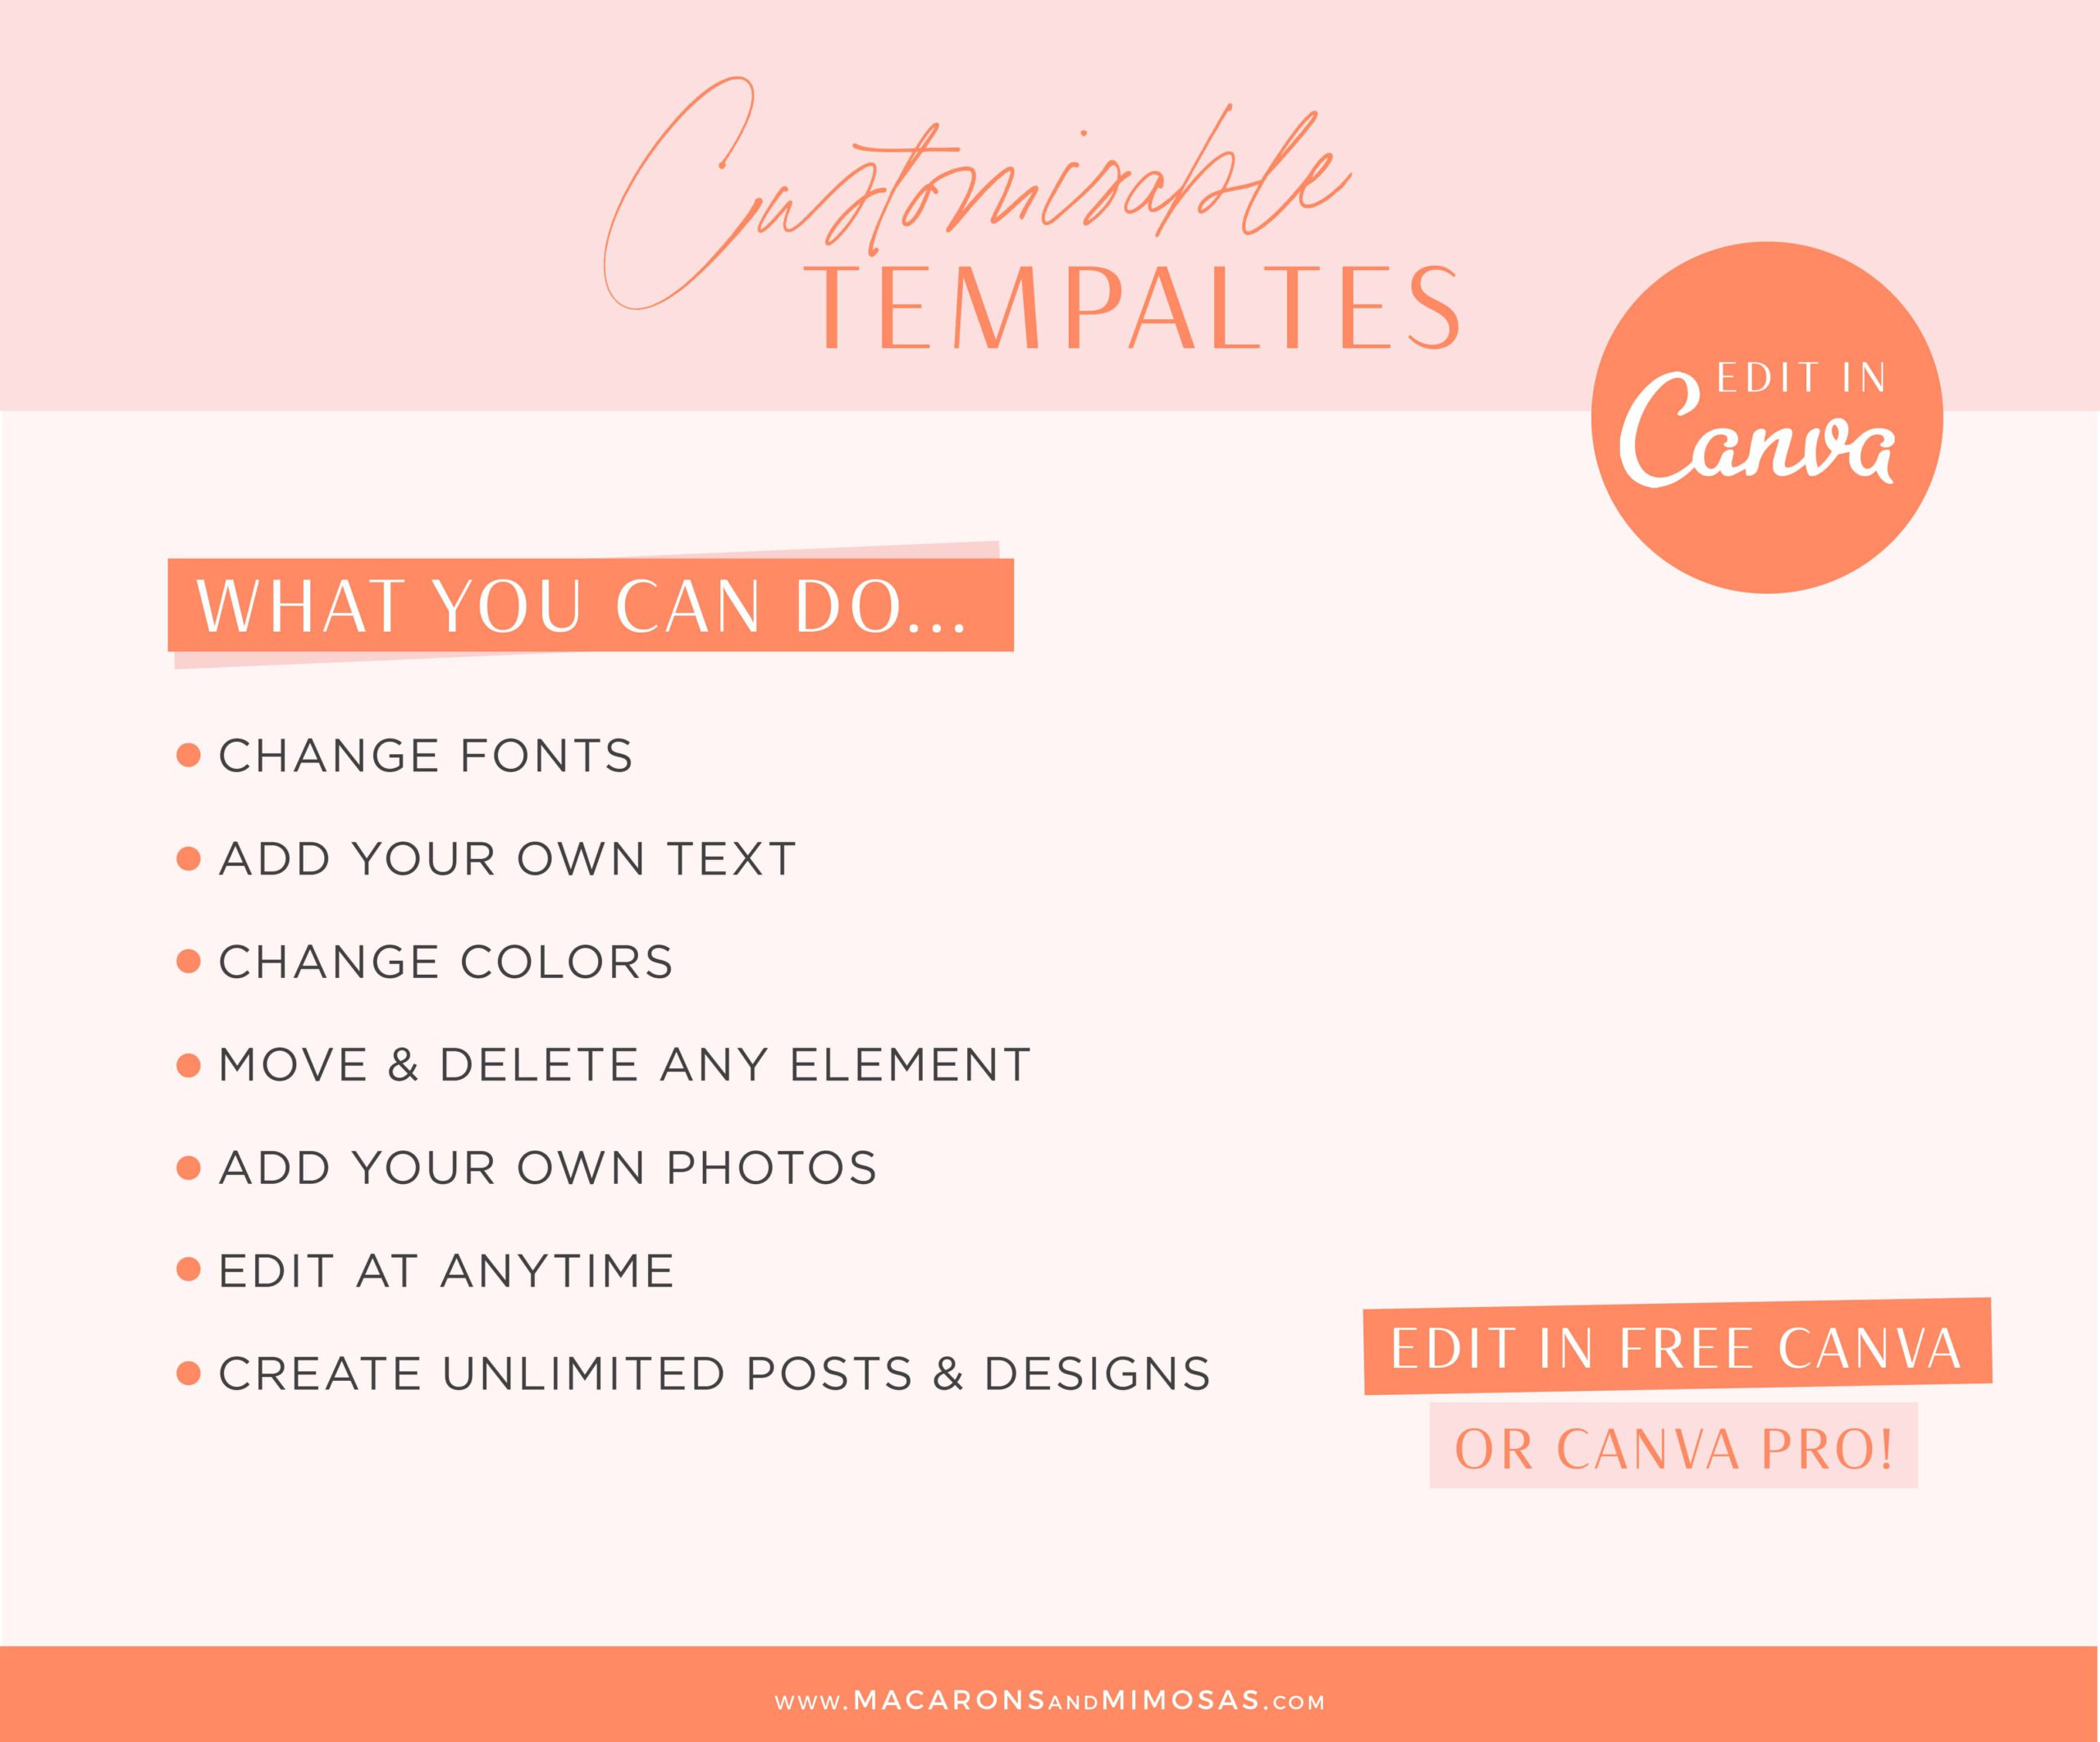 Pink Boho Instagram Templates Canva, Bright Quotes for Instagram, Creative Instagram Templates, Free Colorful Canva Designs, Small Business Brand